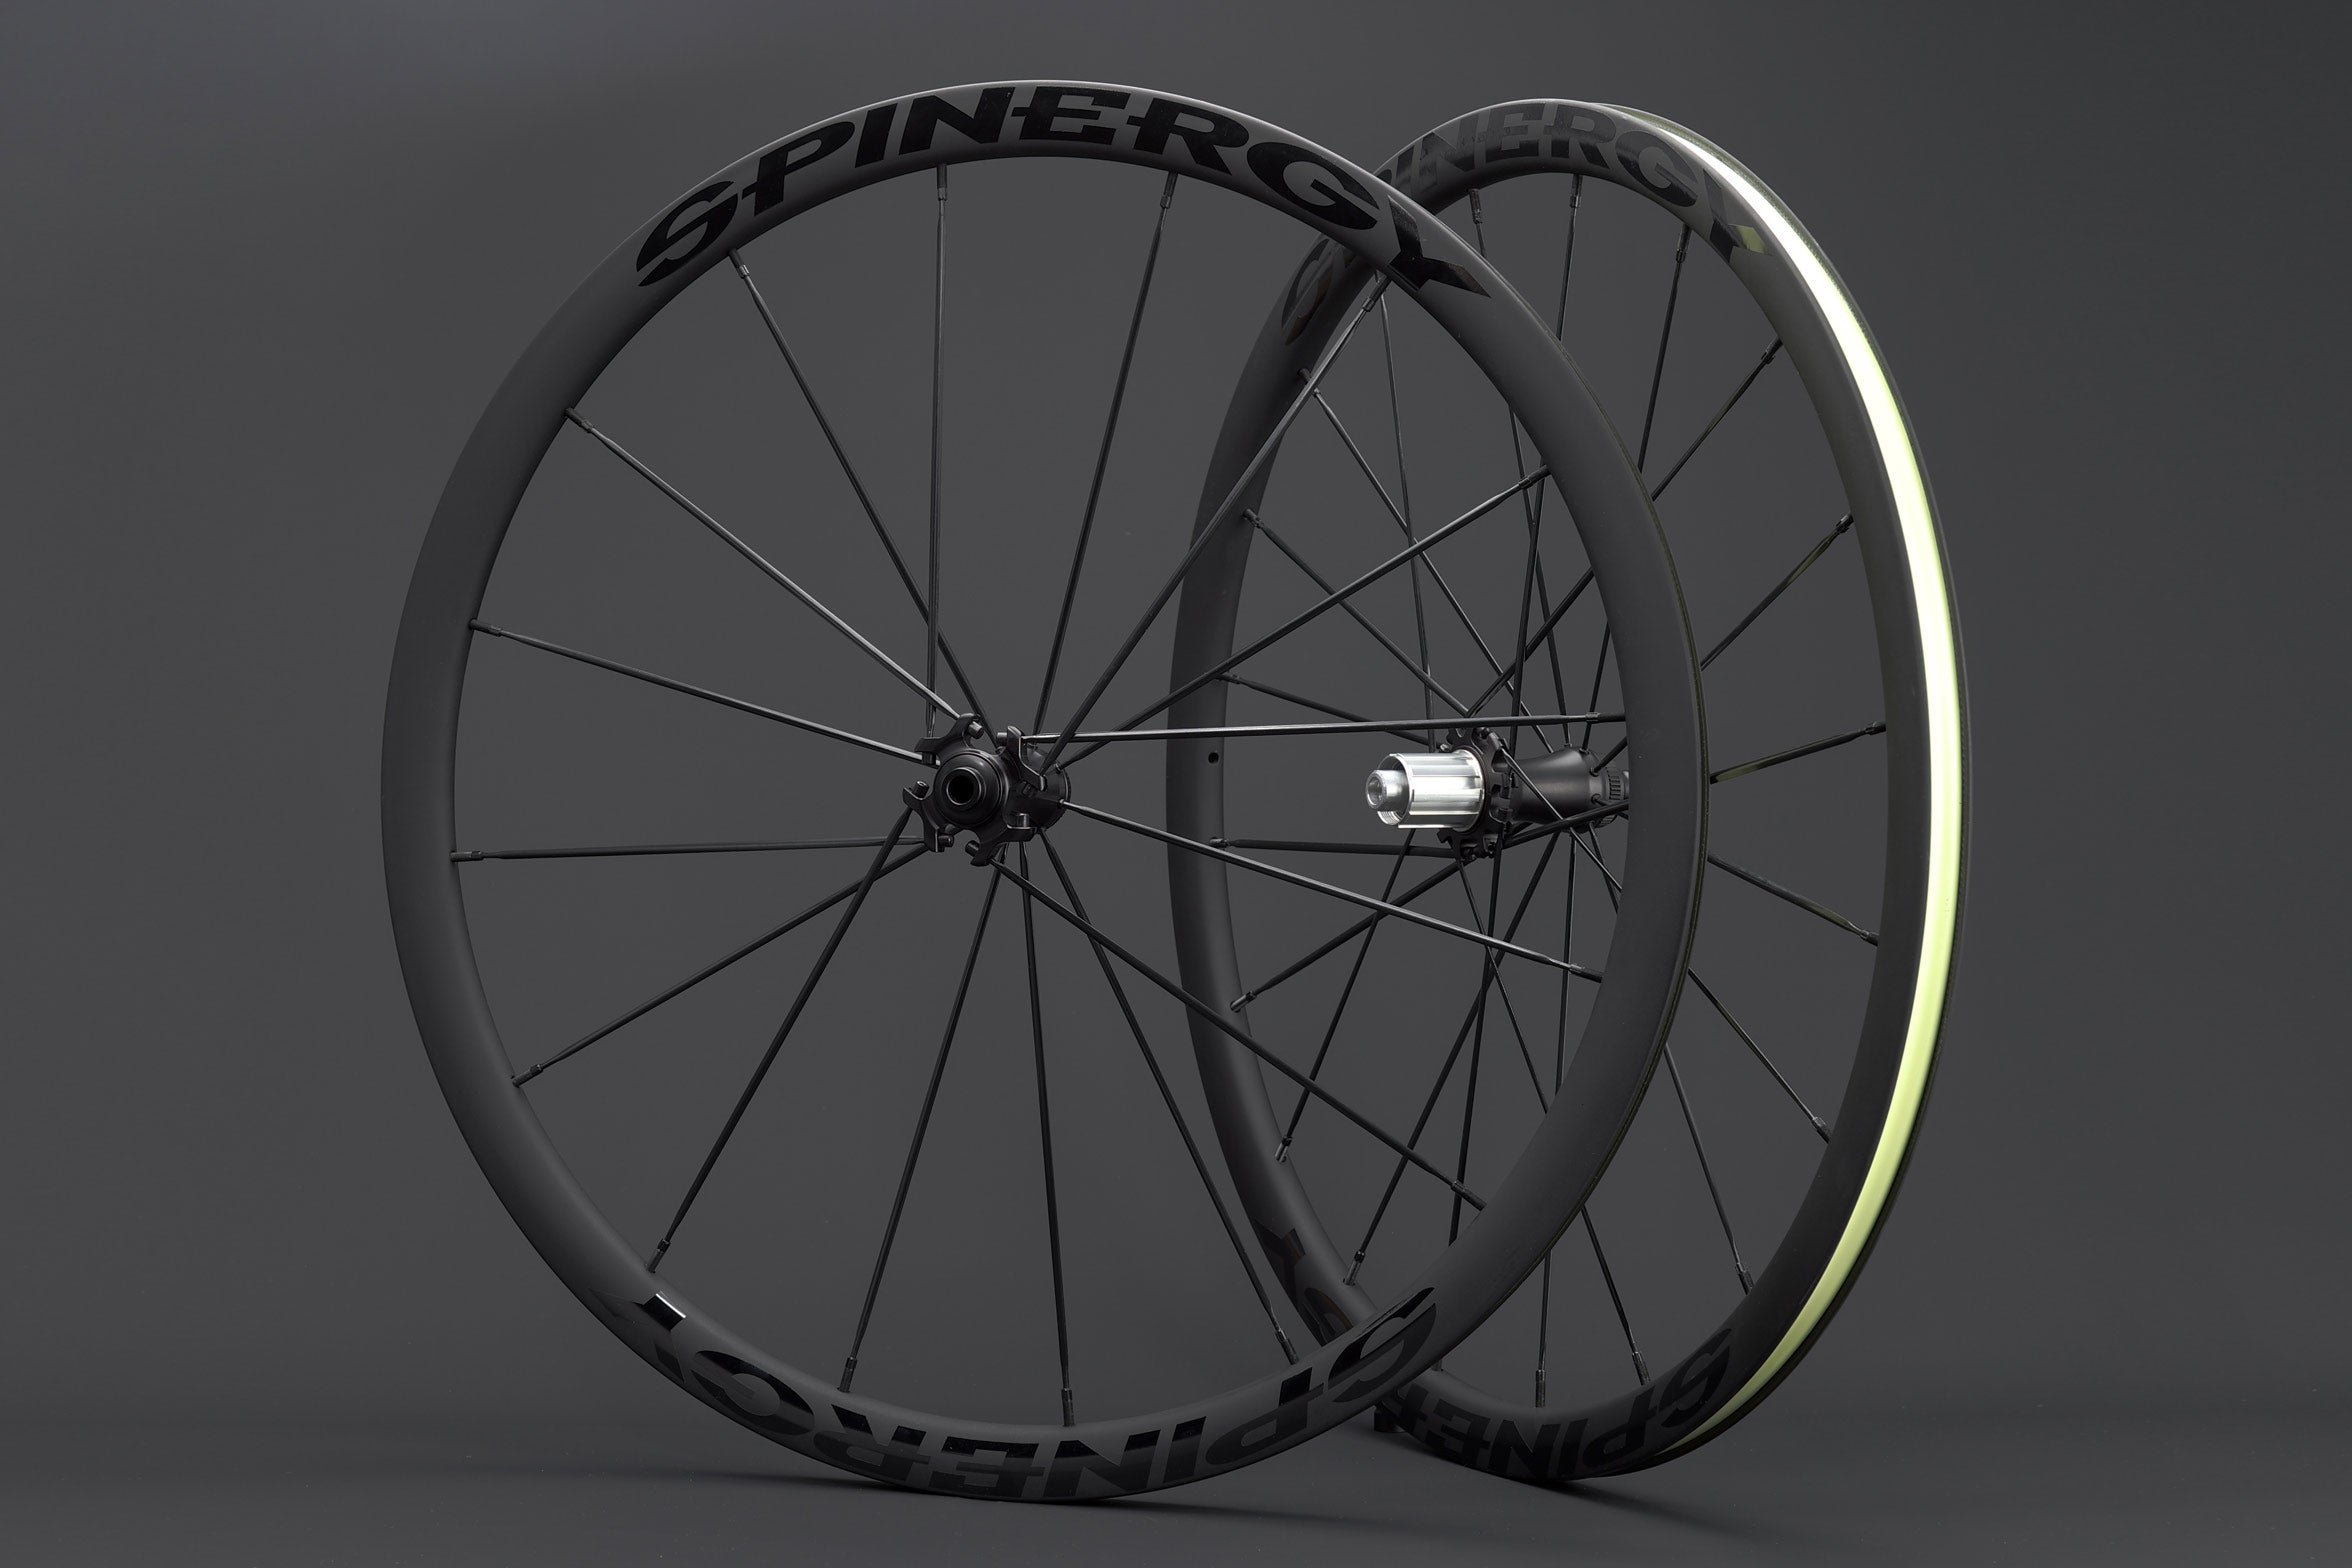 SPINERGY 3.2 CARBON DISC WHEELSET